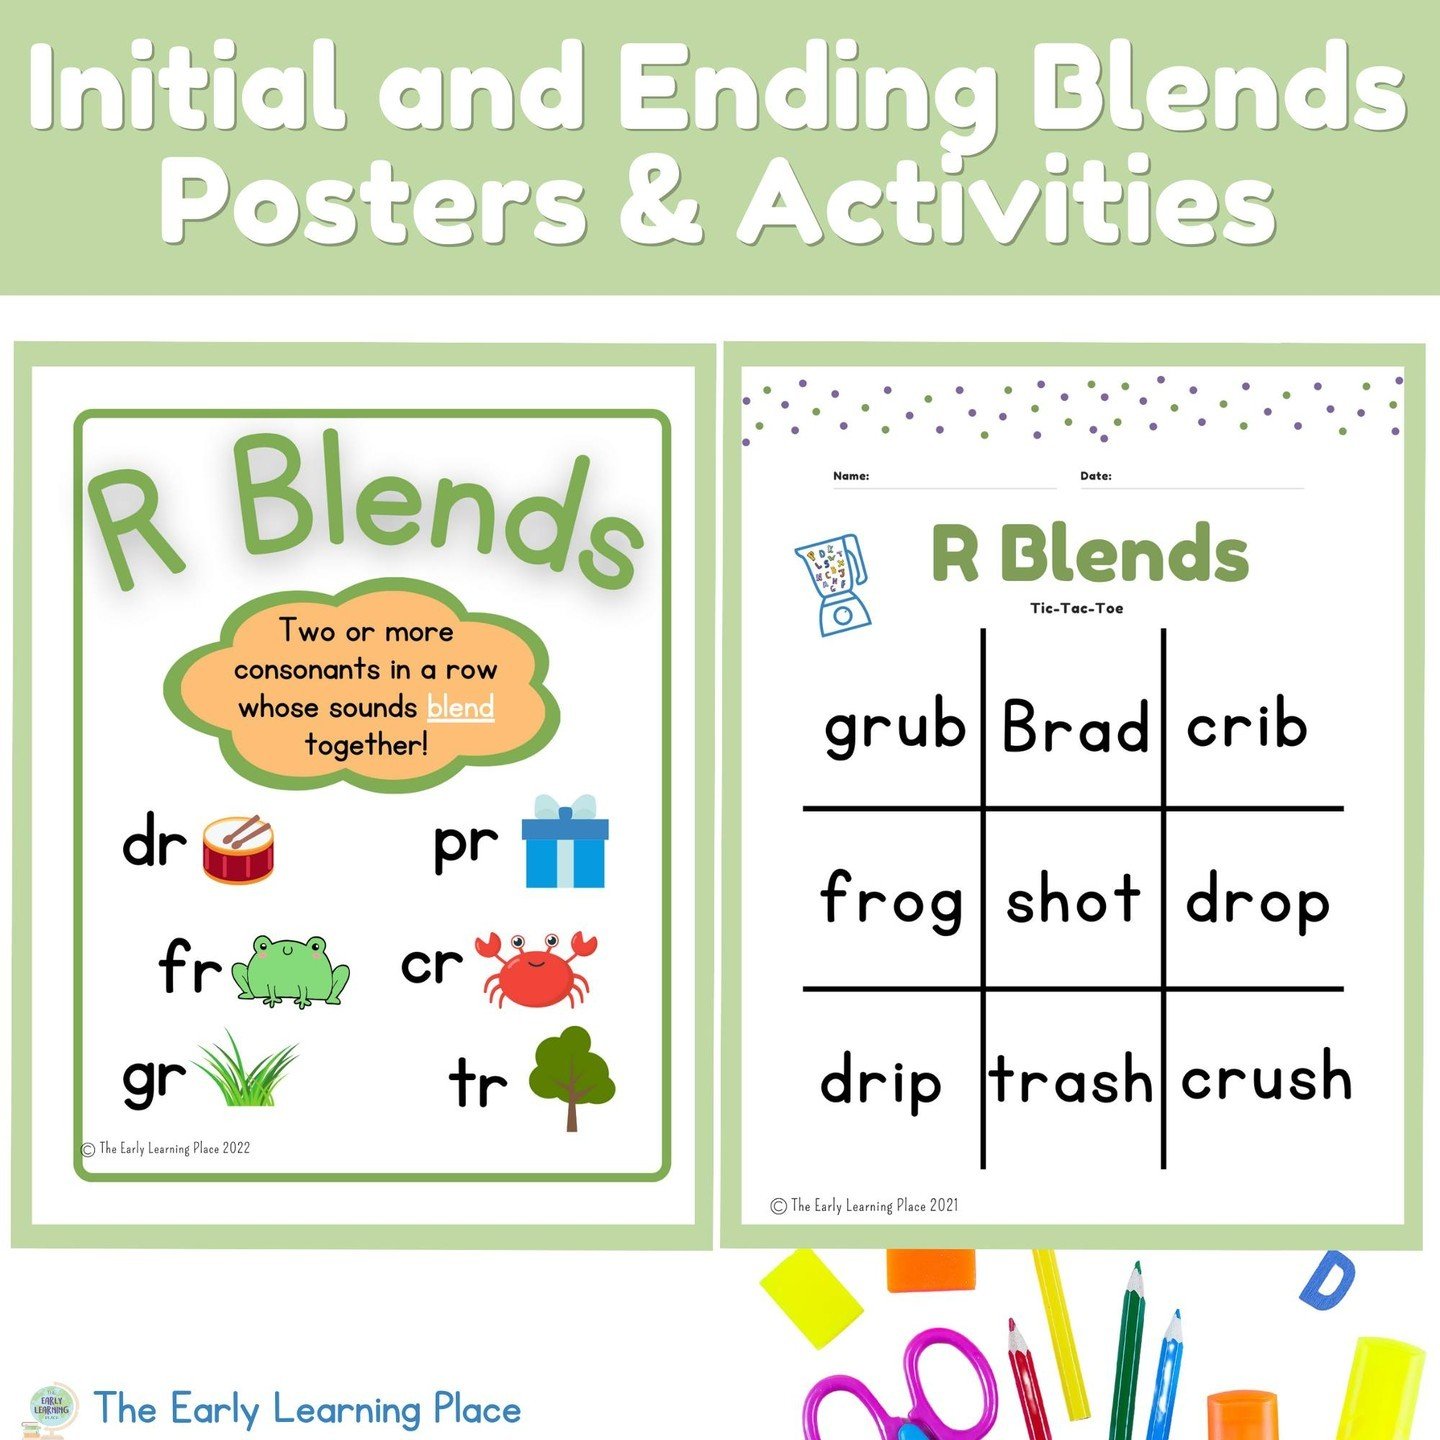 Have a child practicing blends?!?⁠
⁠
Comment BLEND for the link to my initial and ending blends activities! ⁠Or find the link in bio!⁠
⁠
#multisensorylearning #ortongillingham #homeschool #tpt #initialblends #phonics #reading #learningtoread #firstgr